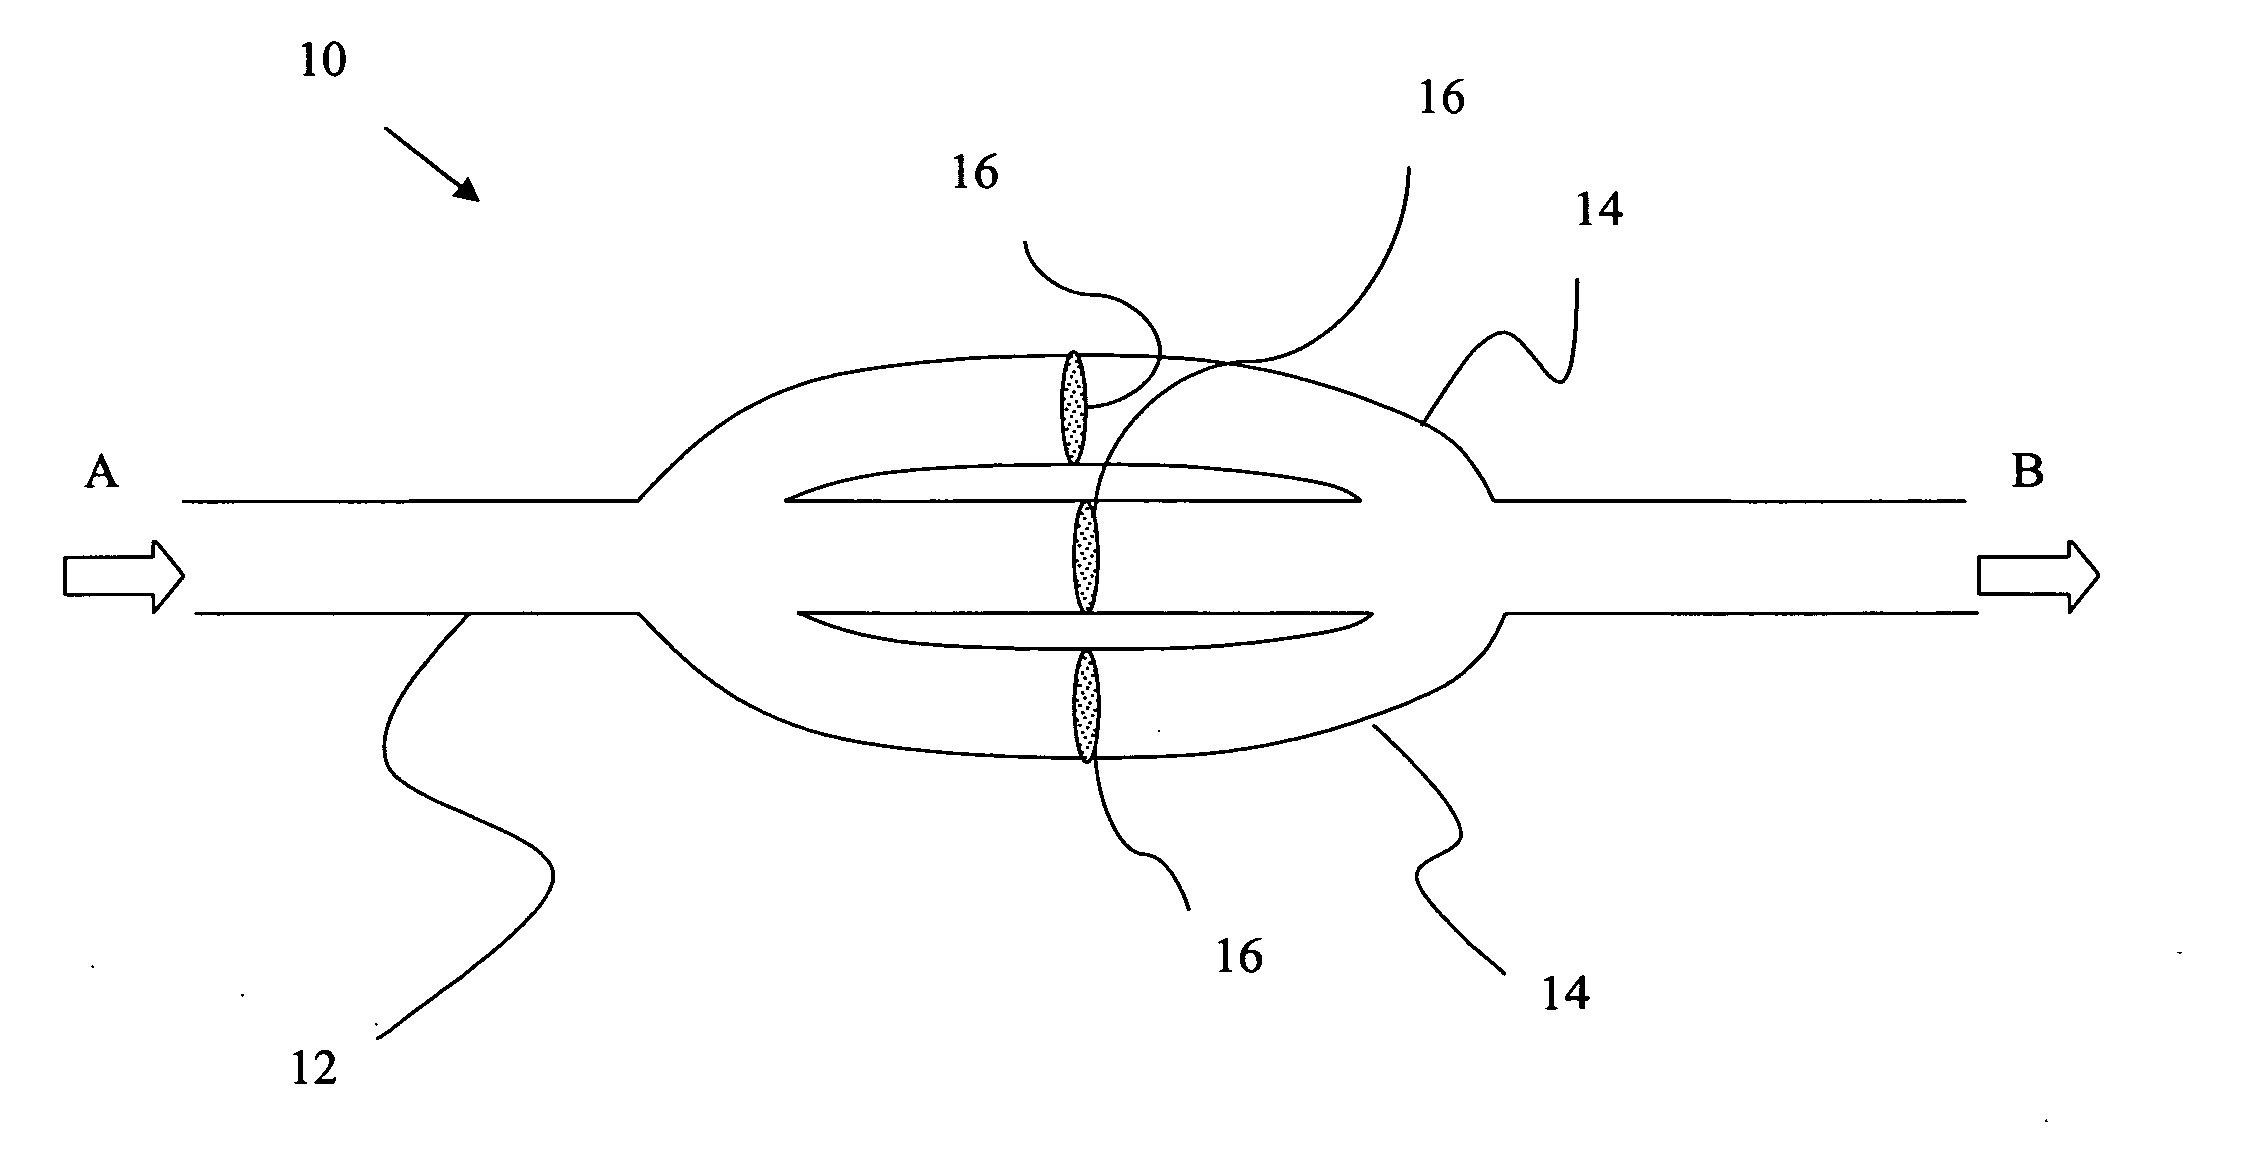 Implantable prosthetic device for connection to a fluid flow pathway of a patient